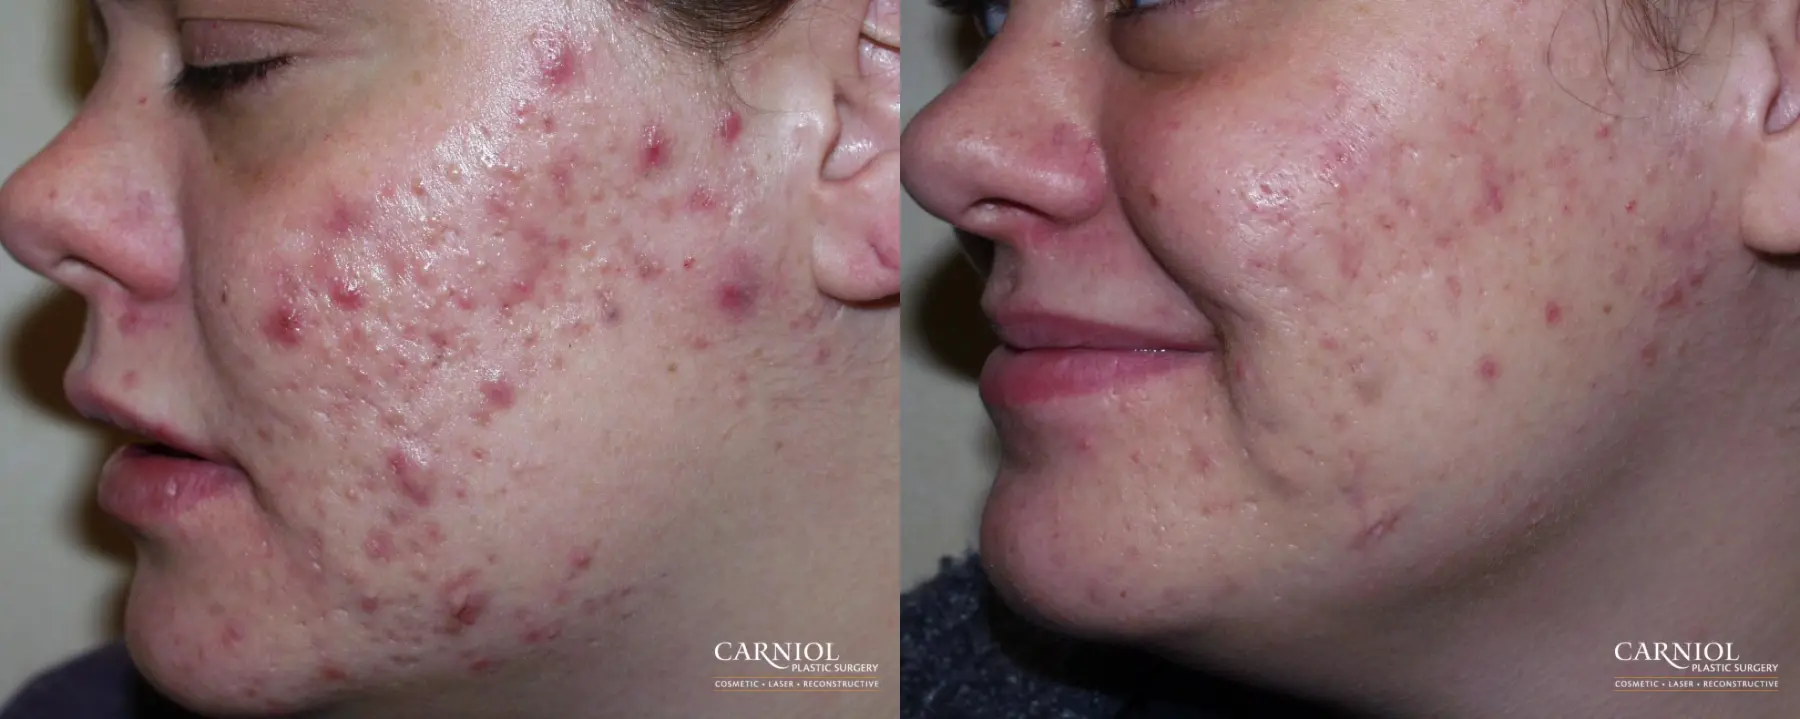 Acne Rejuvenation: Patient 1 - Before and After  